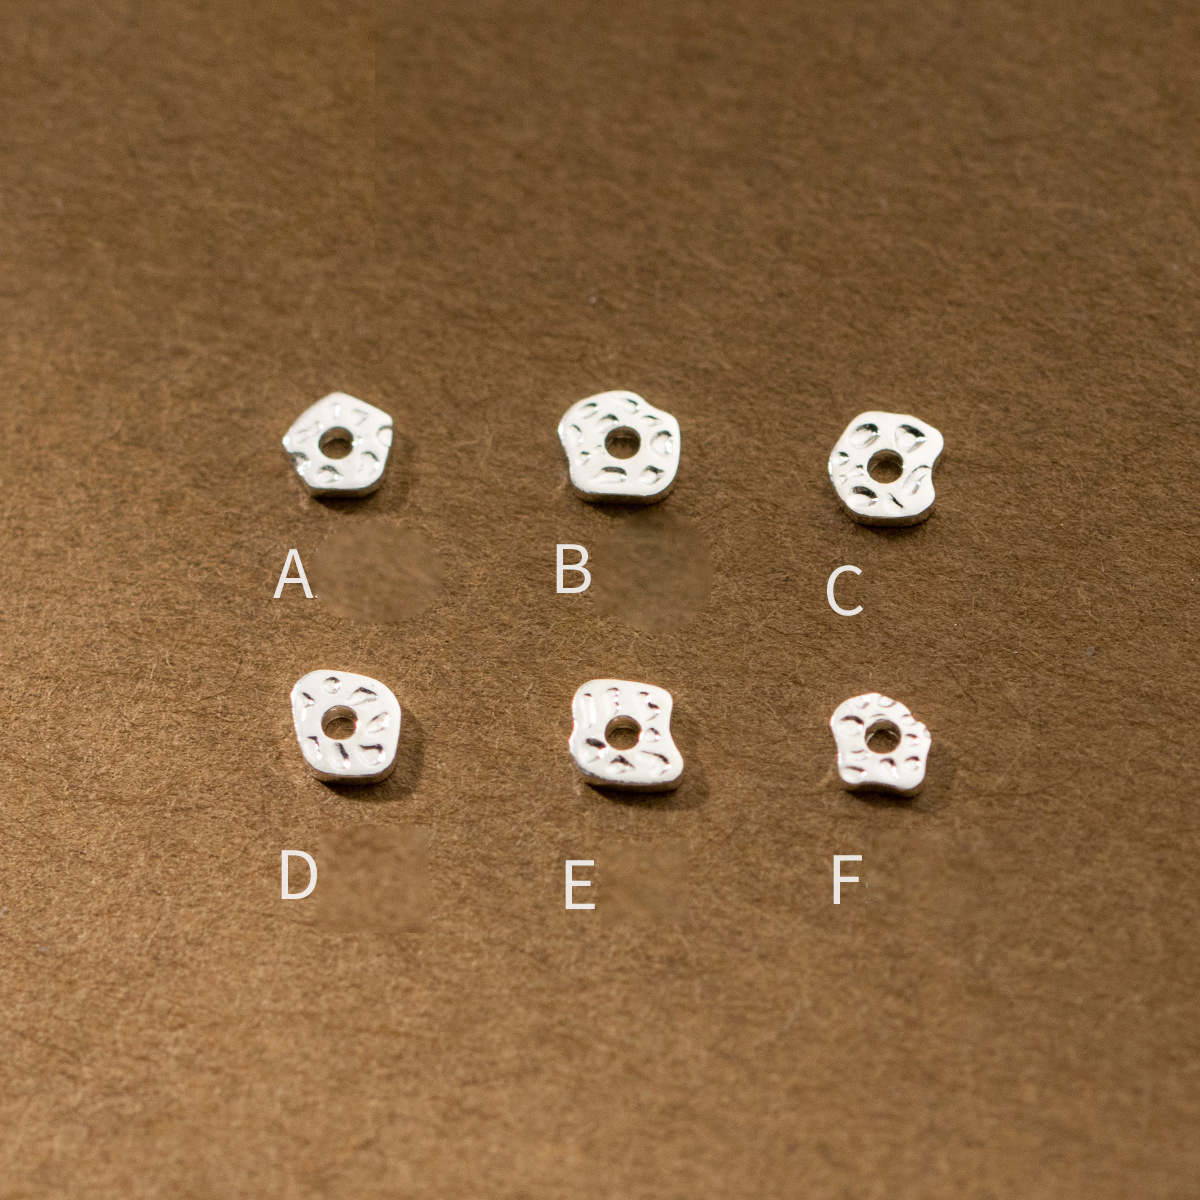 3:Type C (1g about 12 pieces)-4.0 * 0.8 mm thick hole 1.1 mm wide